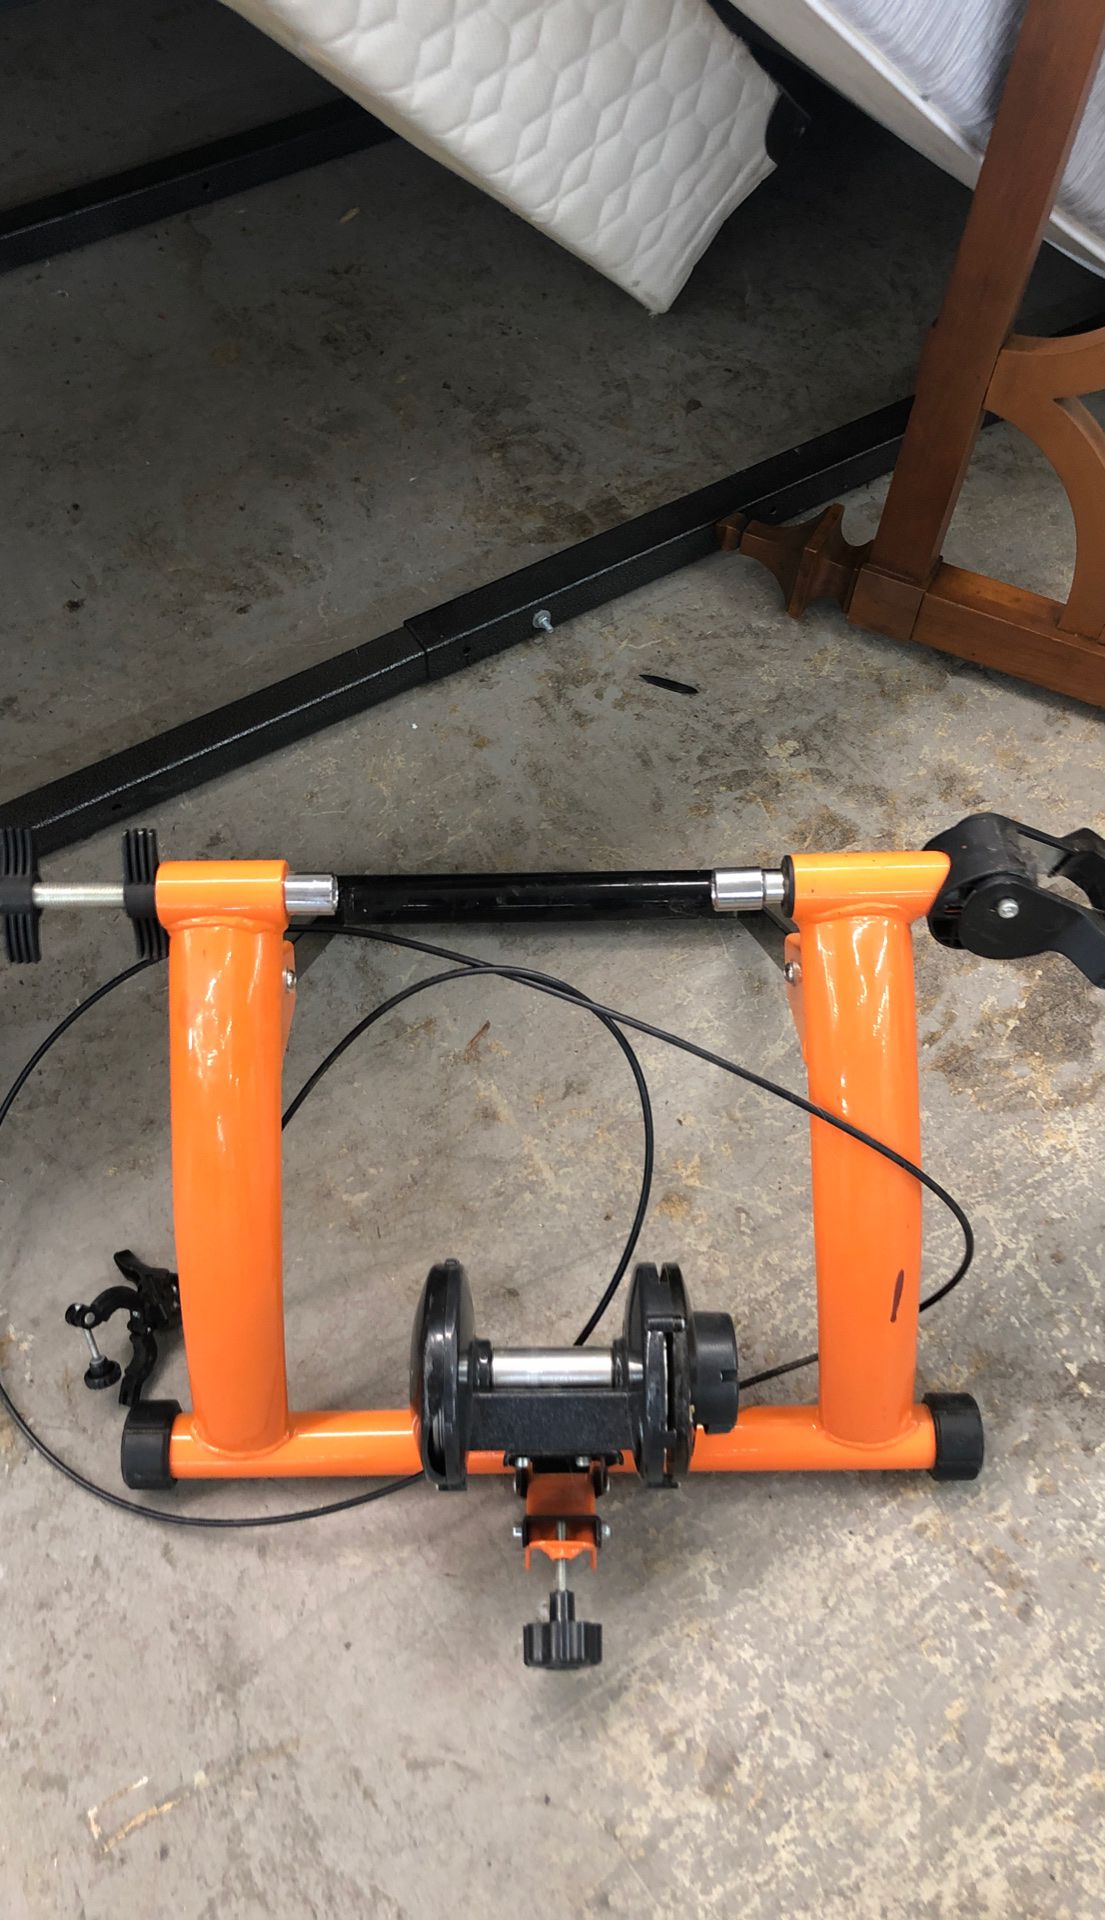 Home trainer for road or mountain bike